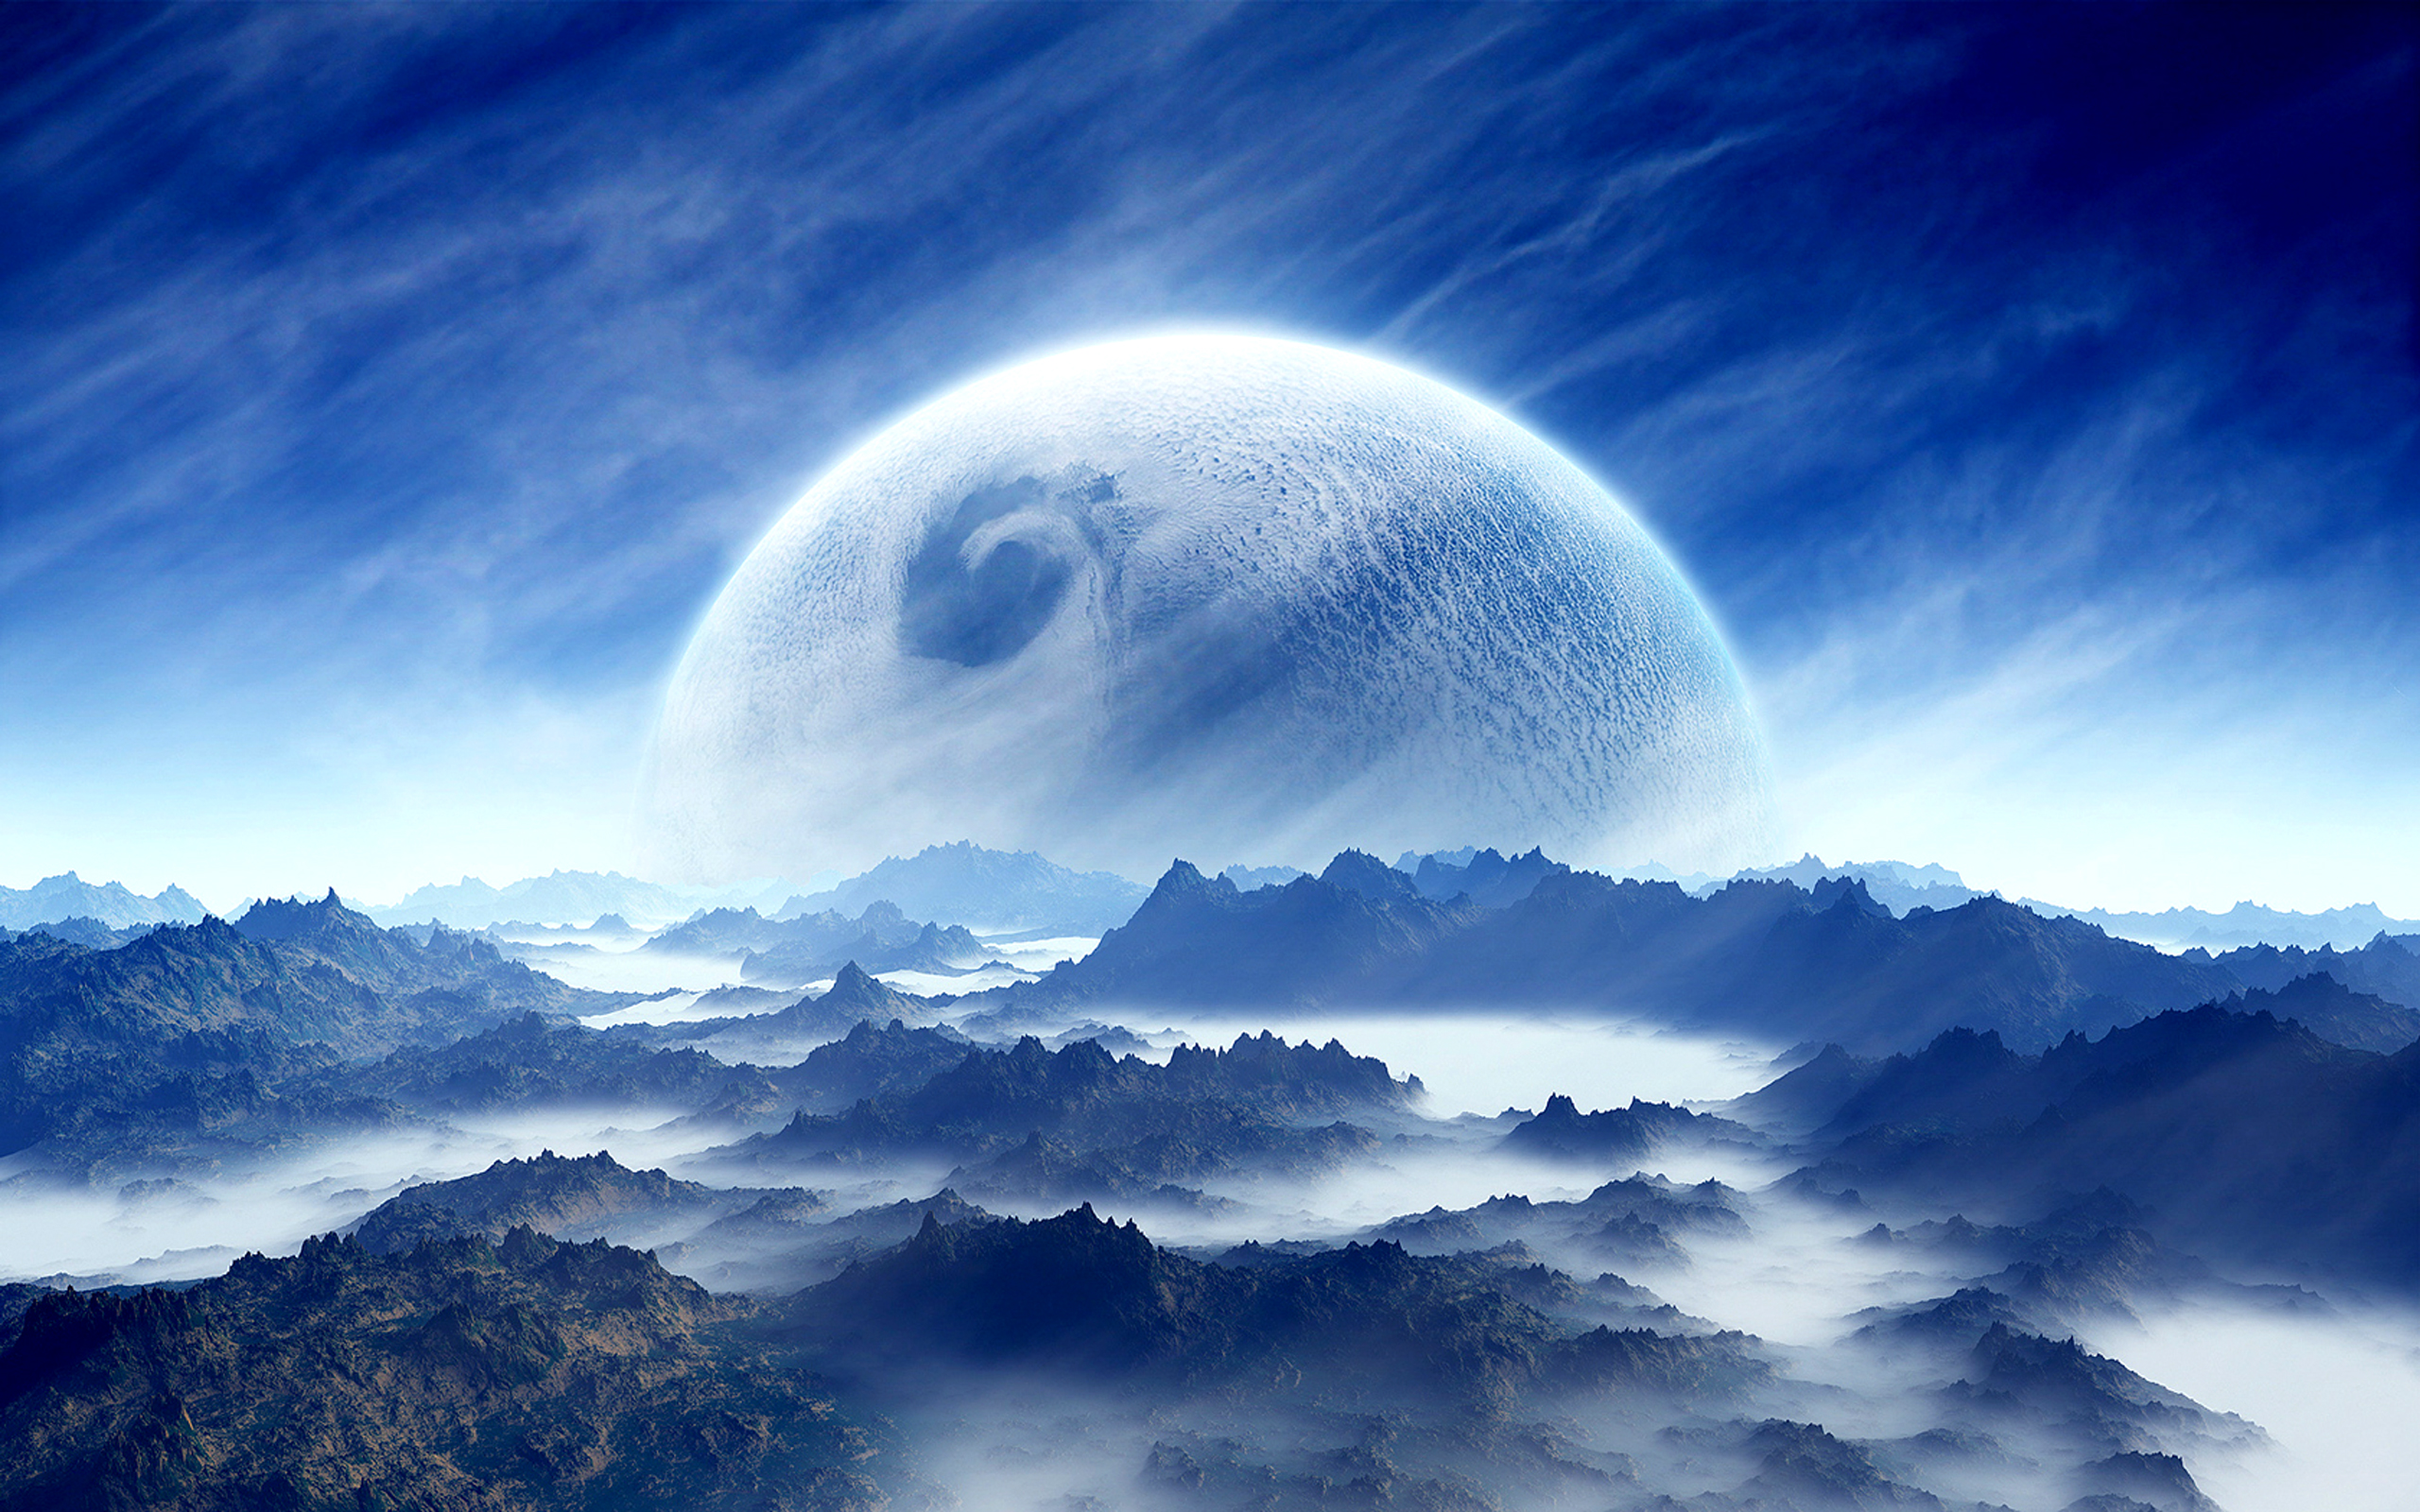 Frozen Planet: A stunning sci-fi wallpaper featuring a majestic planet rise.